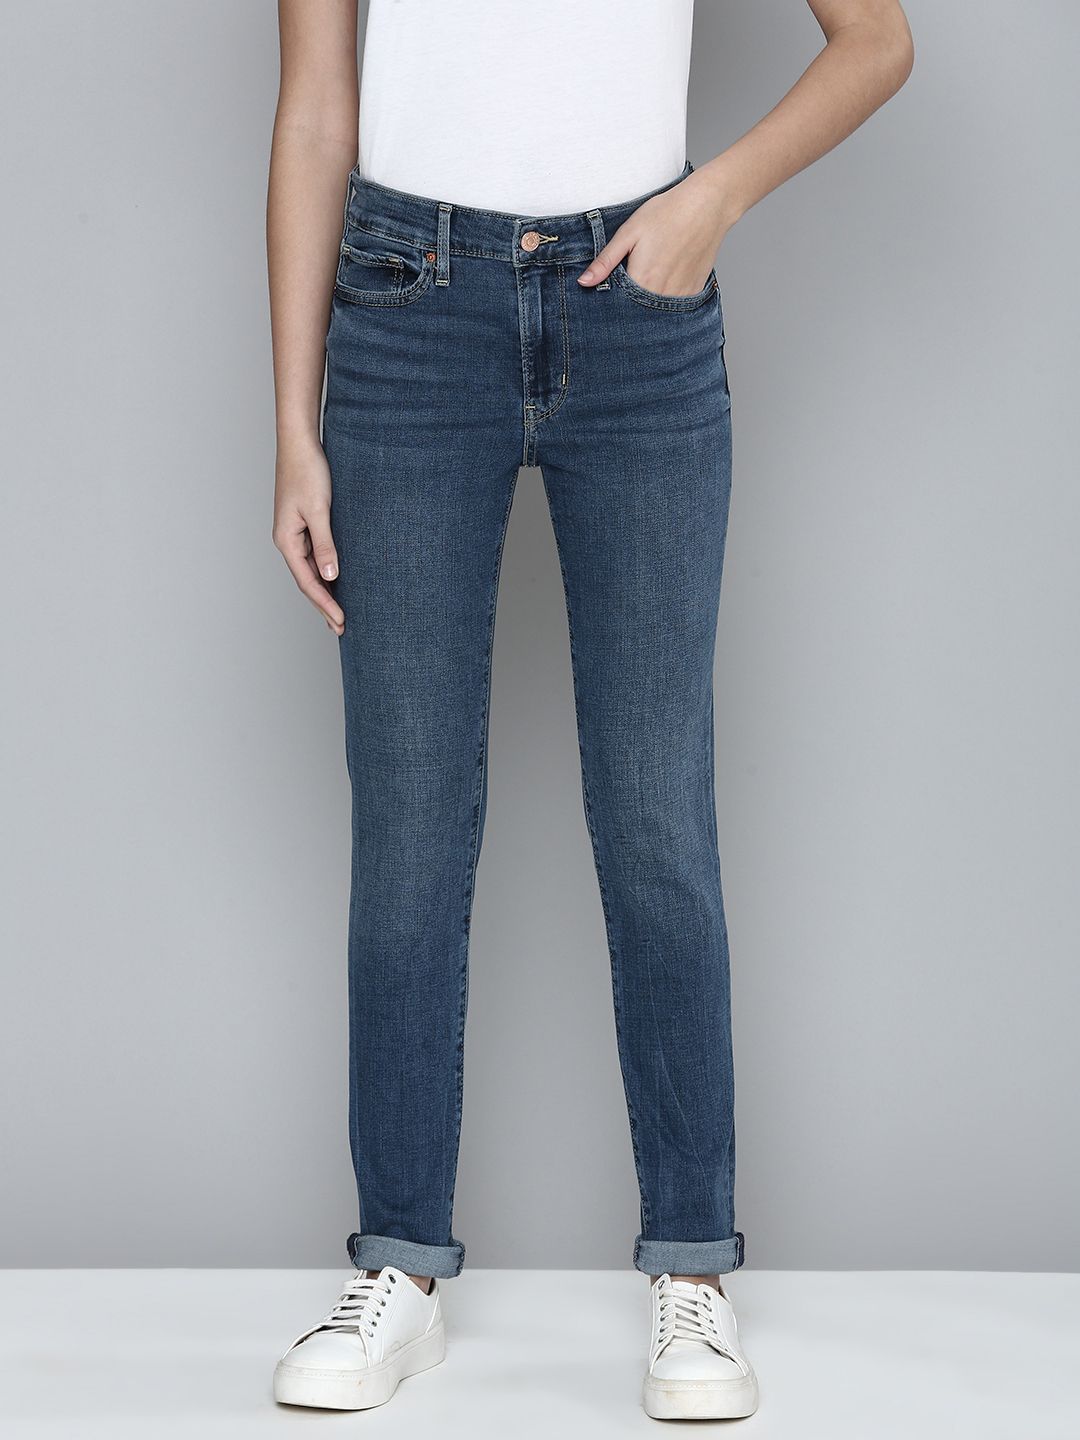 Levis Women Blue Skinny Fit Light Fade Stretchable Casual Jeans Price in India